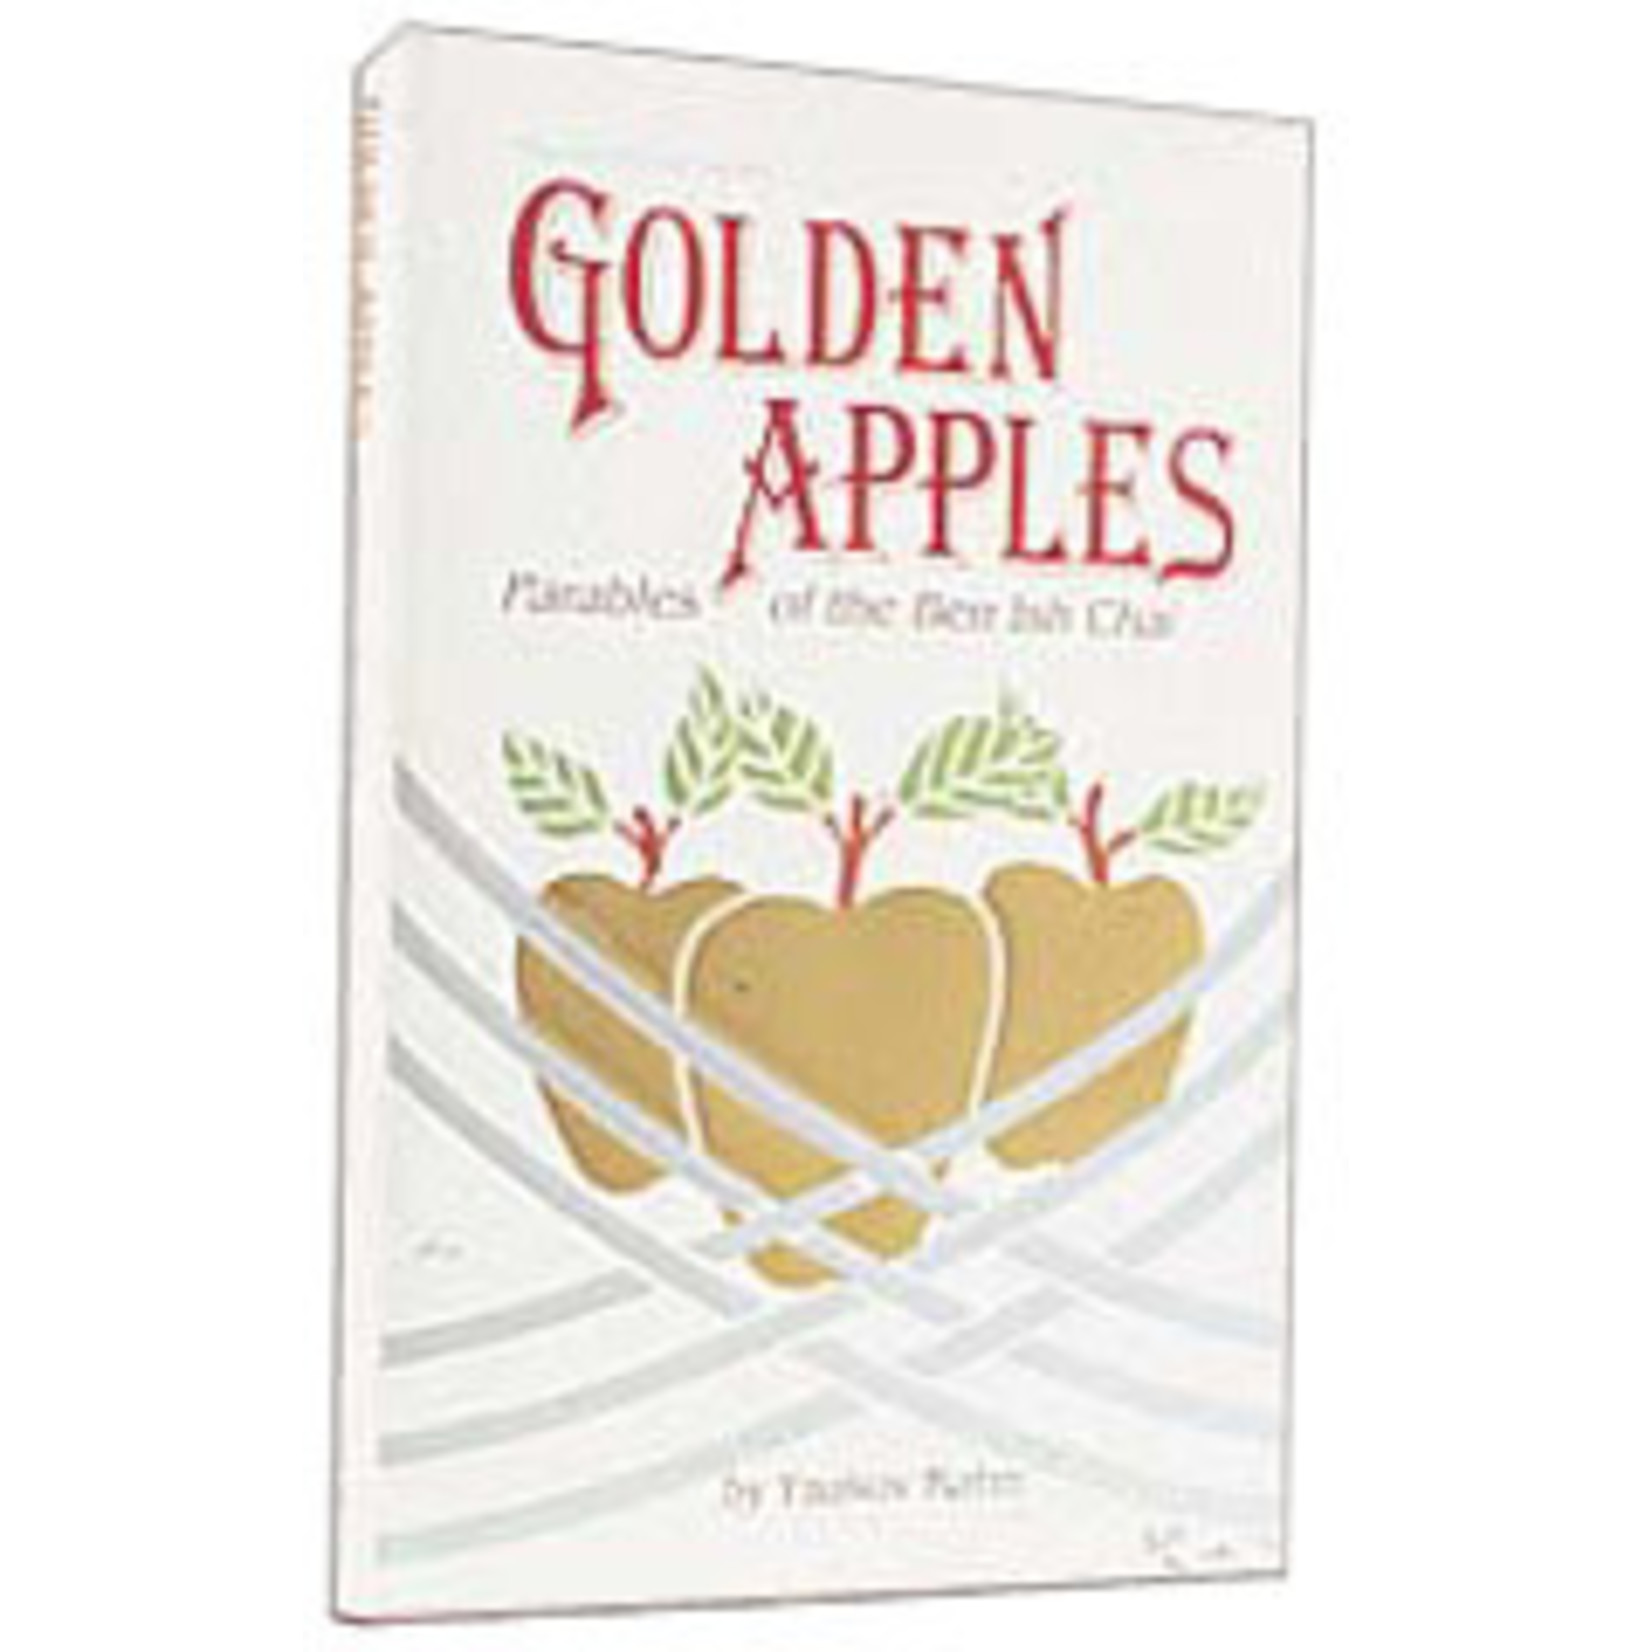 Golden Apples - Parables of the Ben Ish Chai